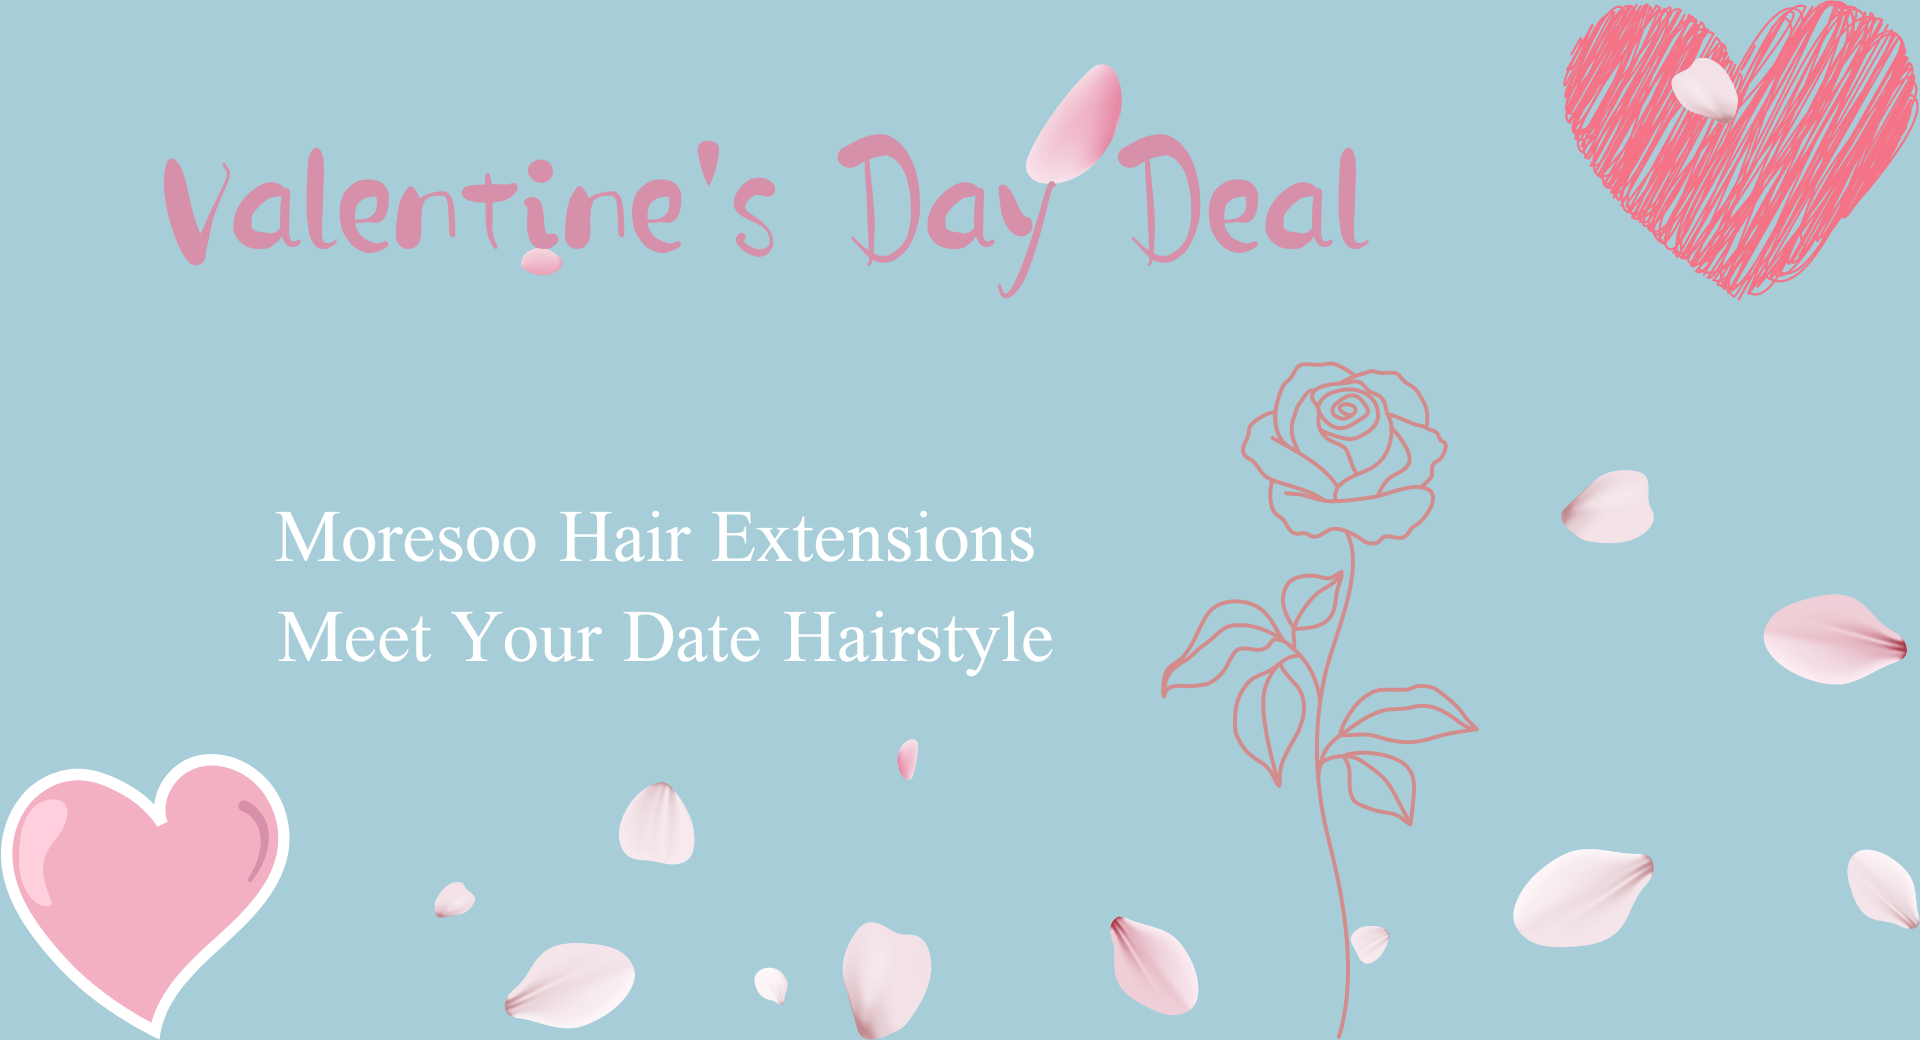 Valentine's Day Deal With Moresoo Hair Extension